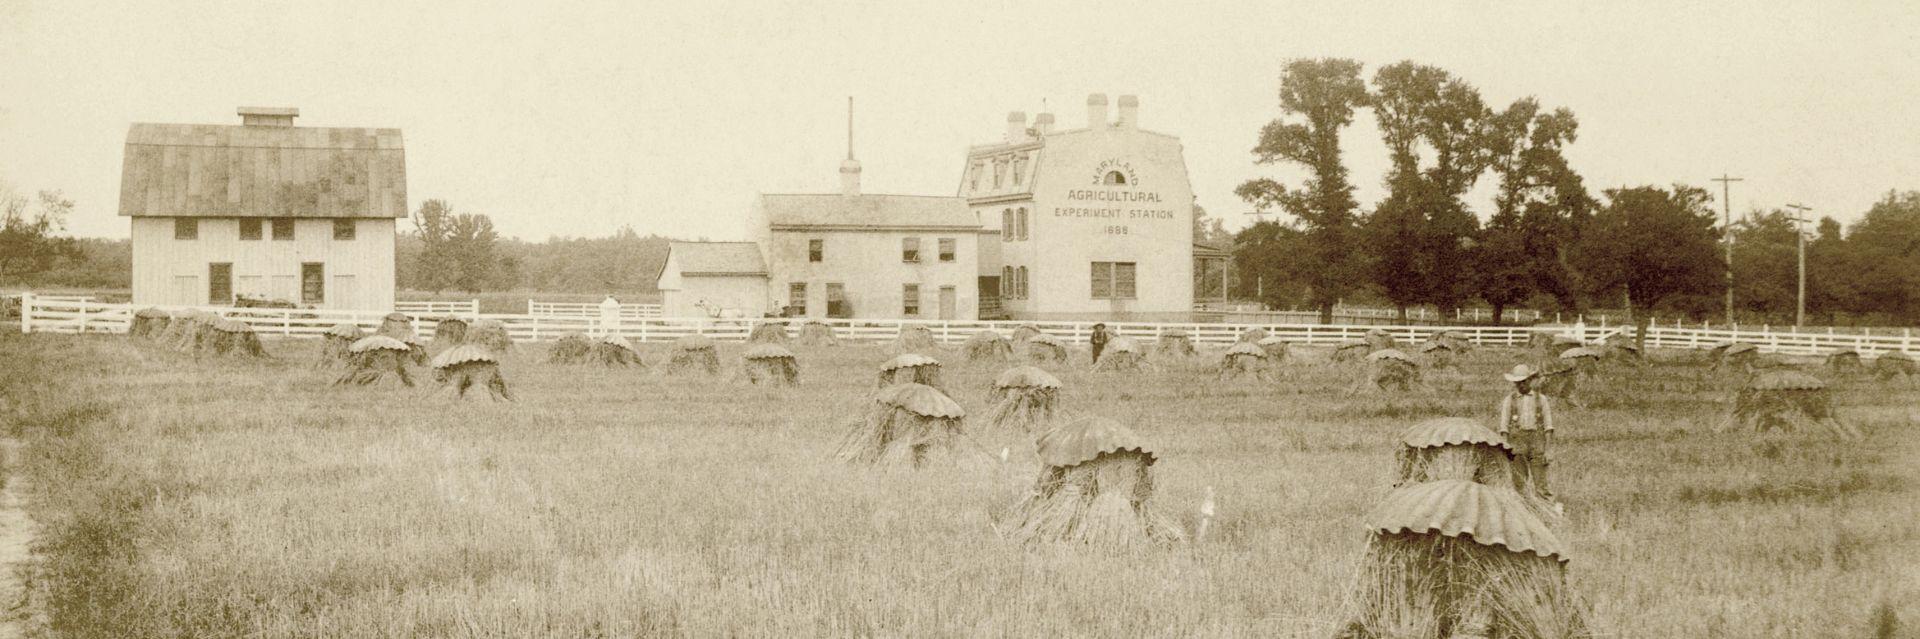 historical sepia-toned photo of a Black man standing in a field by a hay bale in front of Rossborough Inn on UMD's College Park campus